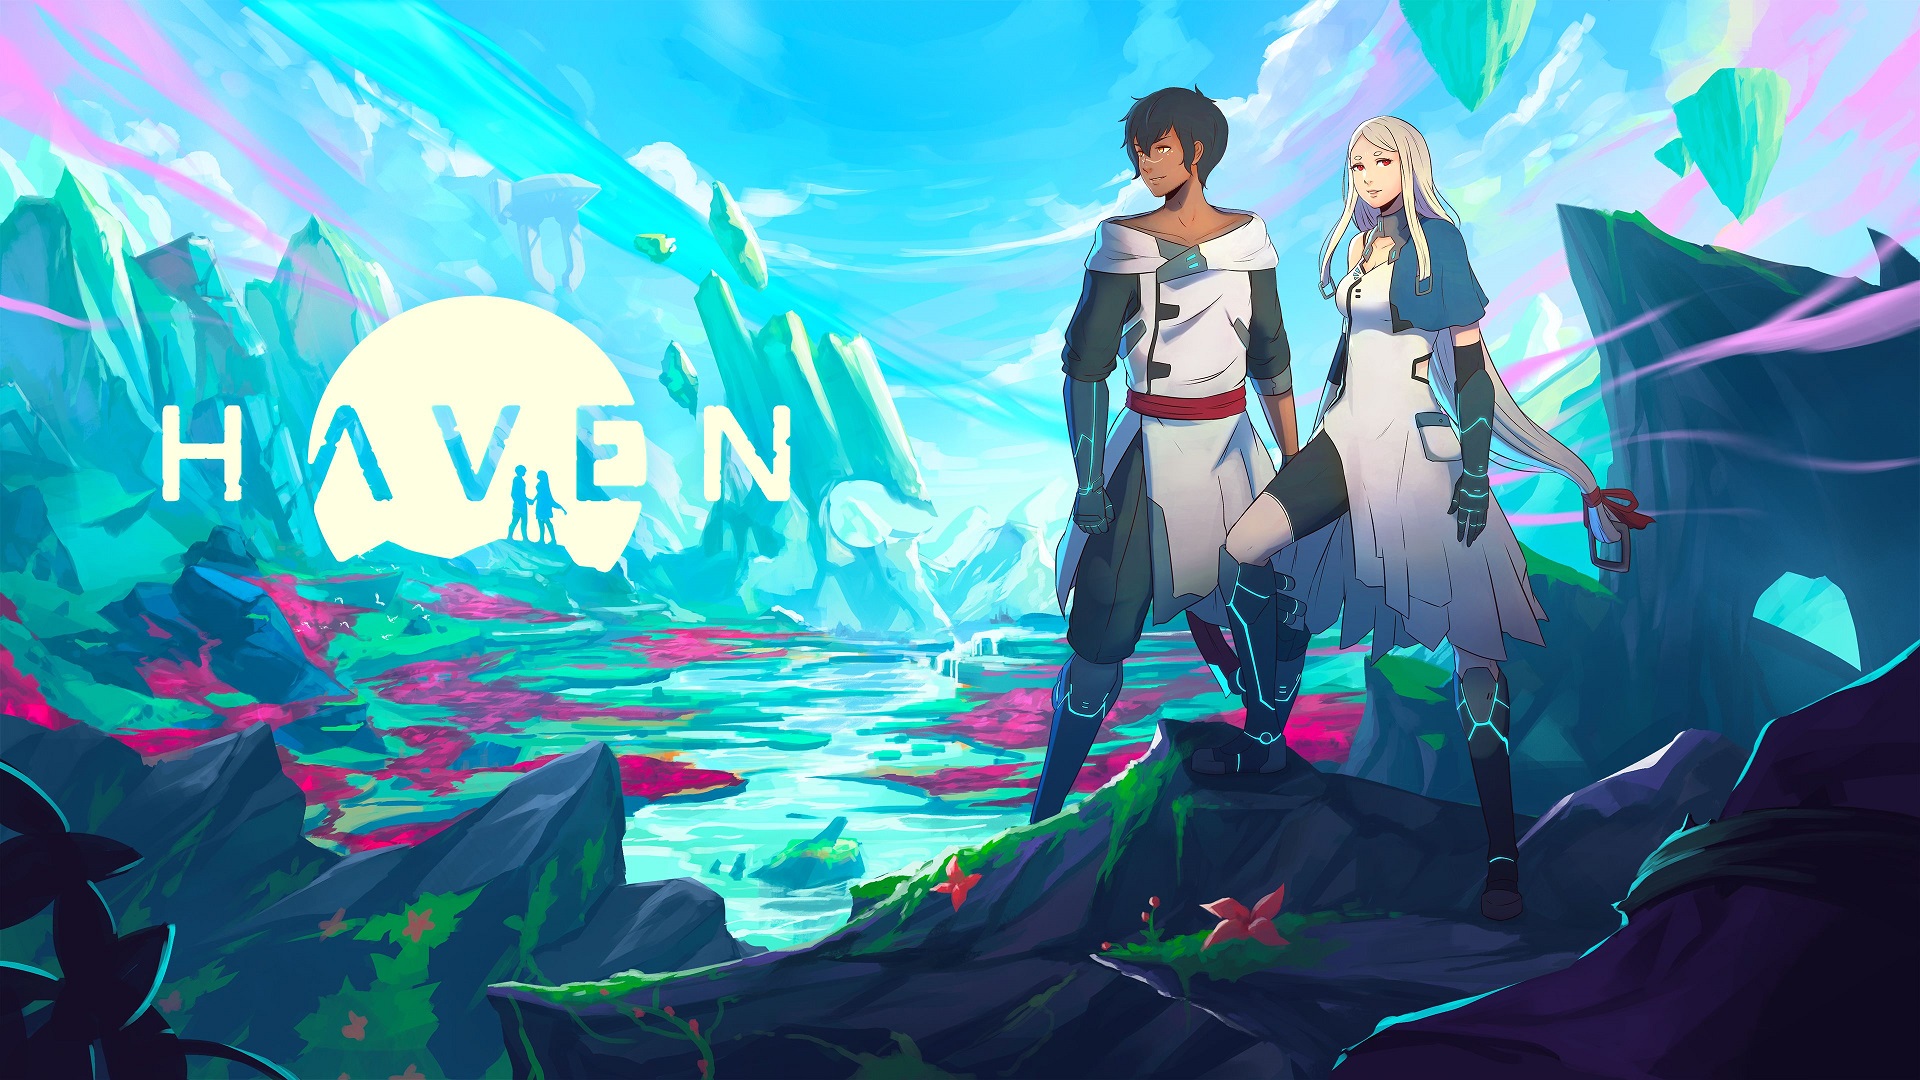 Glide over the plains and fight for love in Haven, Available today